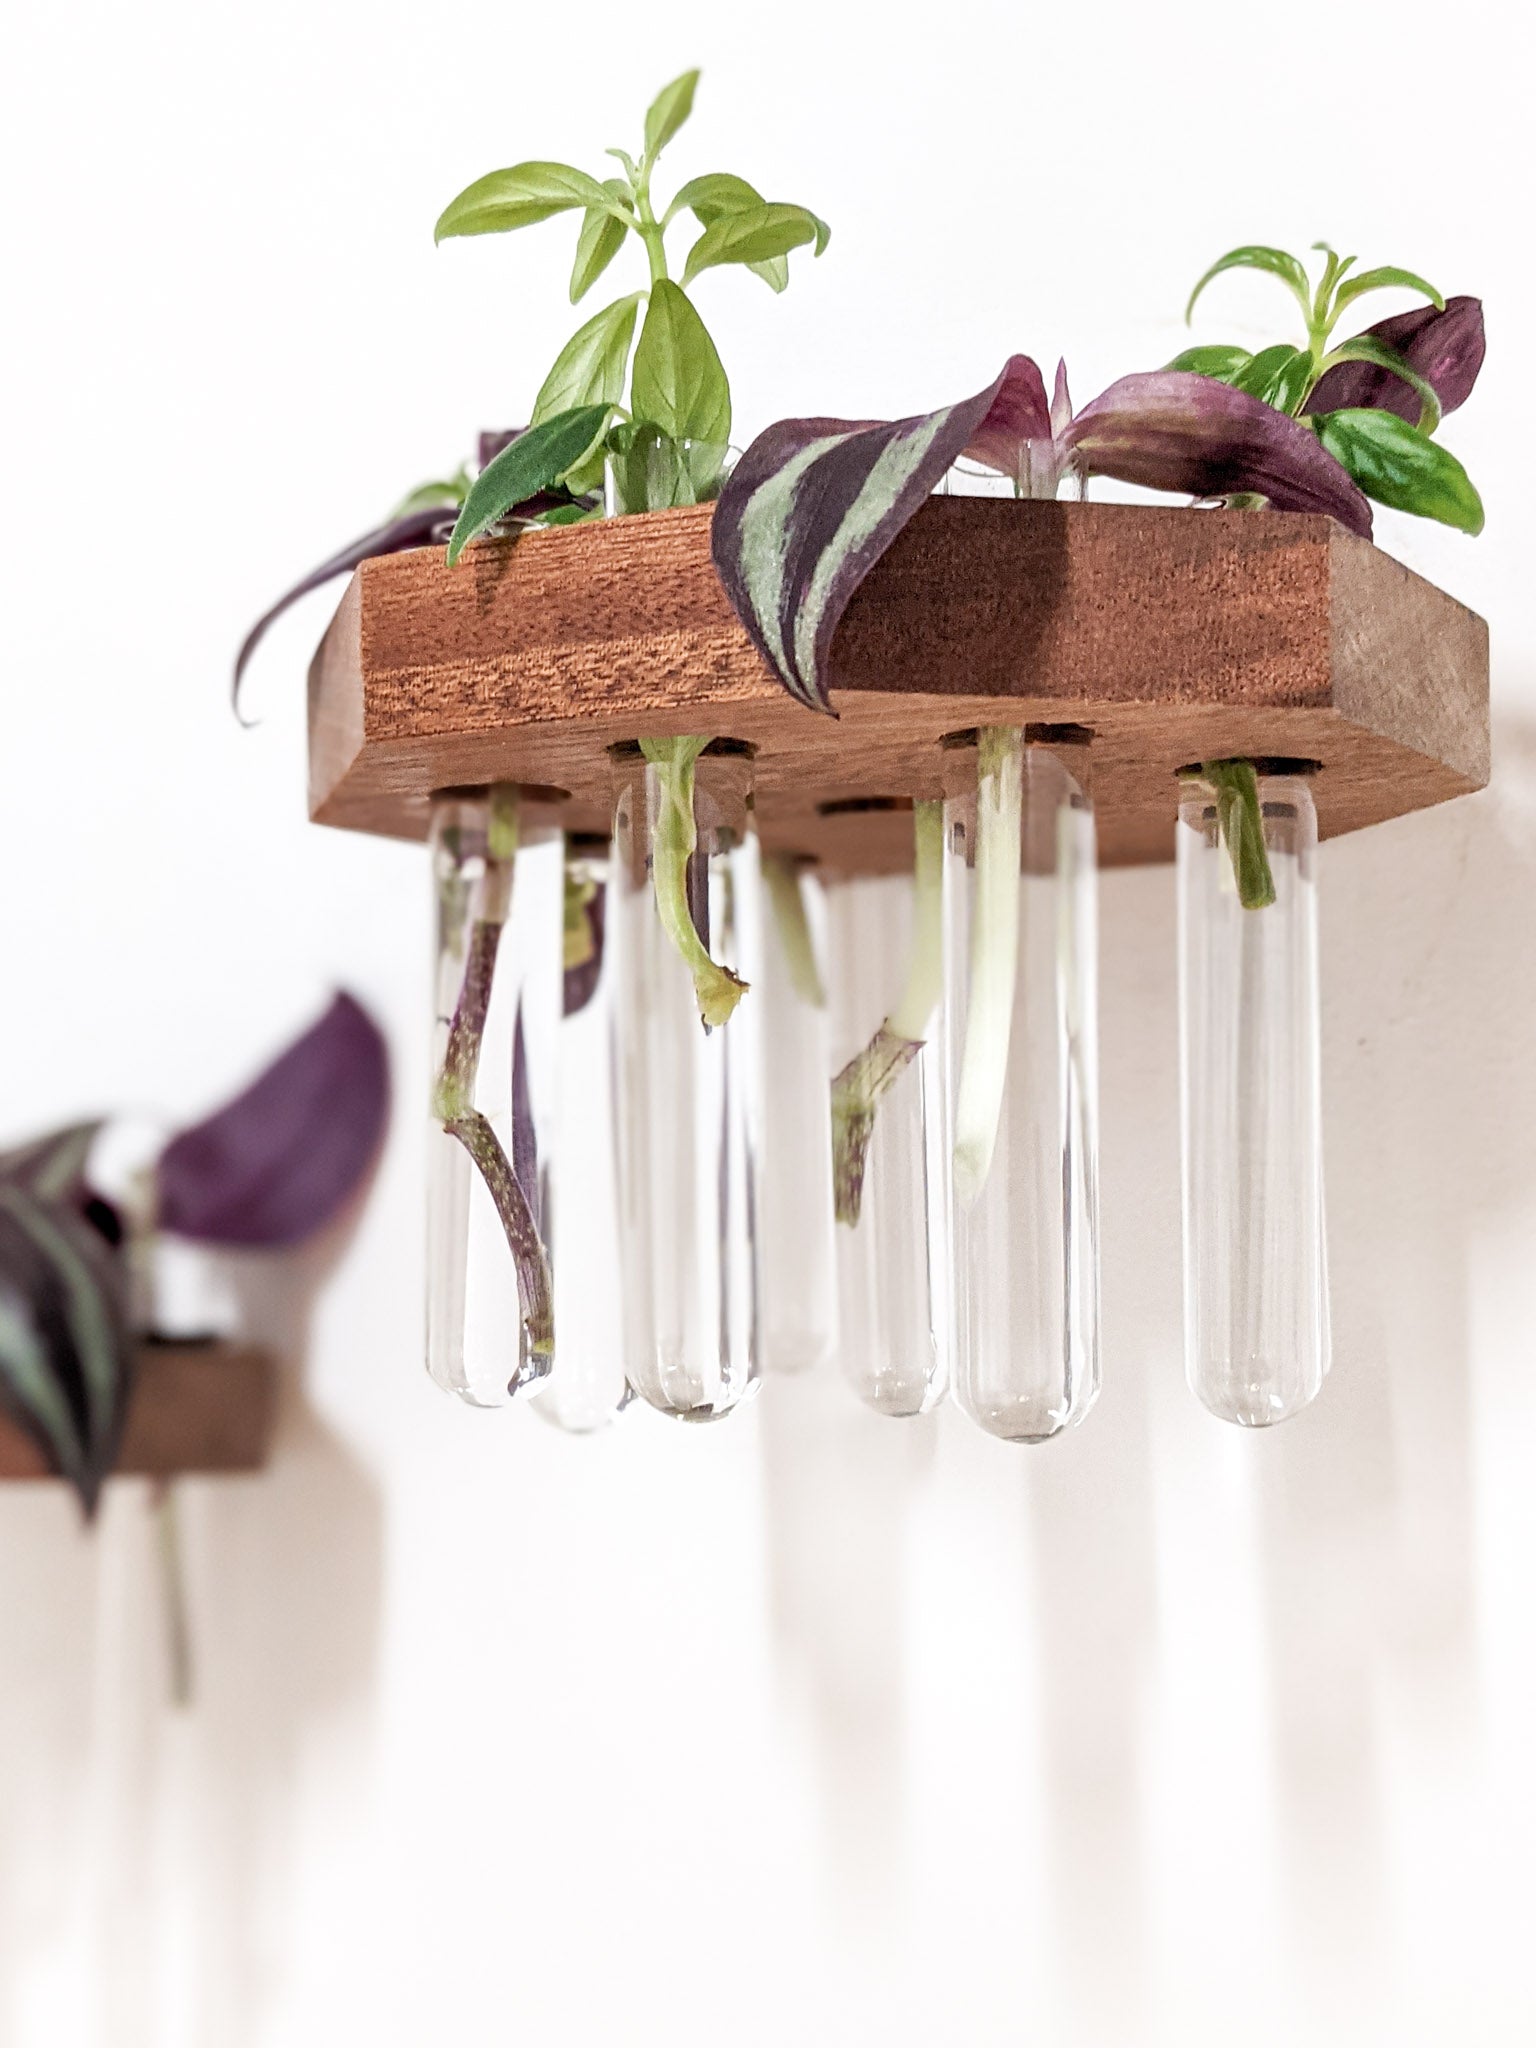 Five glass test tubes hang from a mahogany octagon wall-mounted propagation station. Wandering Jew cuttings are placed in the test tubes and their purple and green leaves drape over the edges of the octagon.